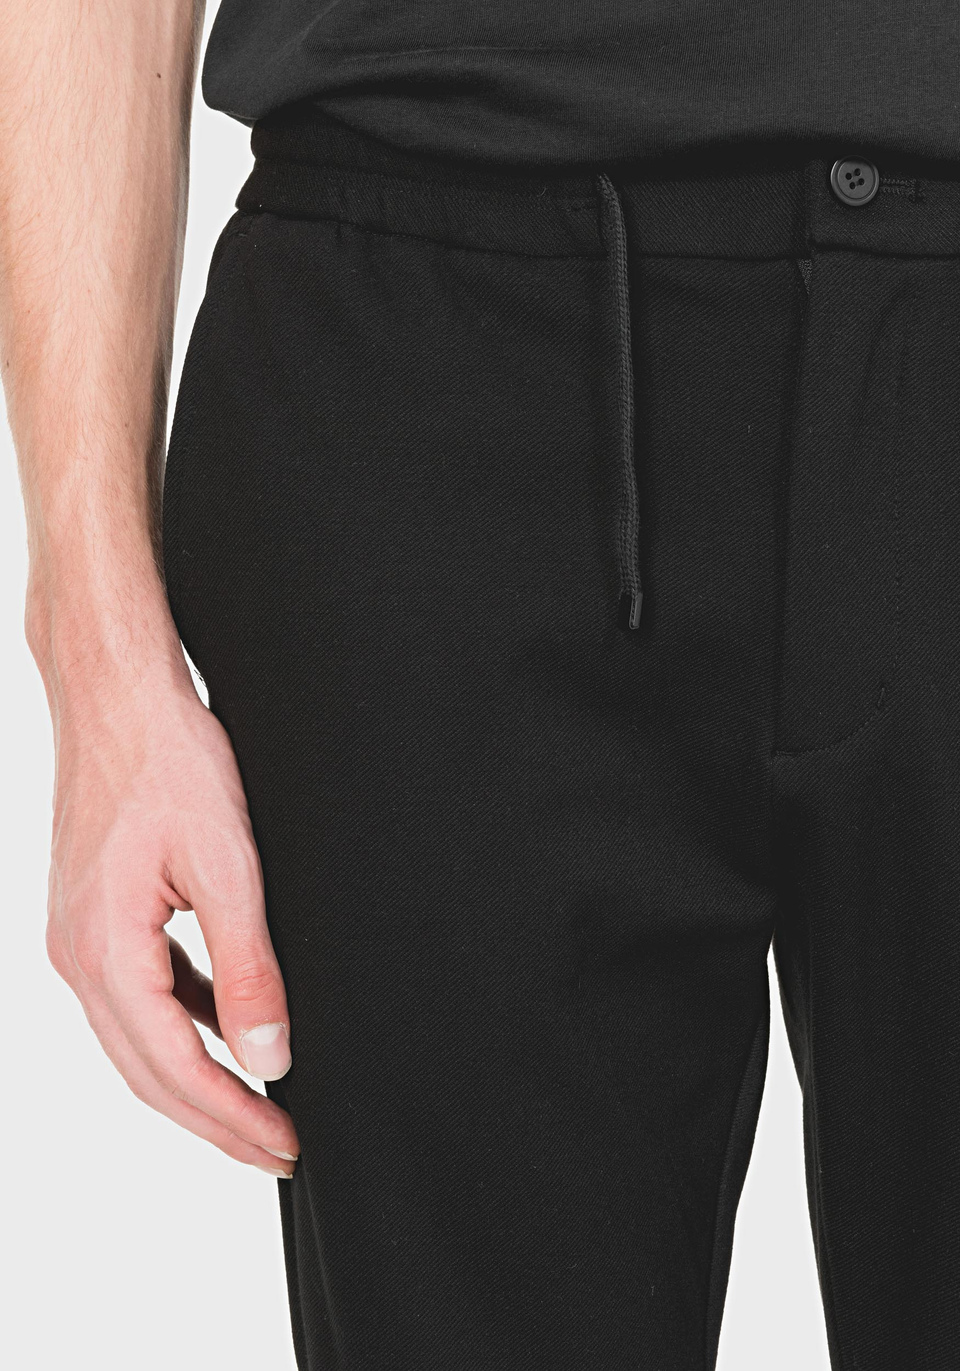 SPORTY SLIM-FIT TROUSERS IN STRETCH COTTON - Antony Morato Online Shop